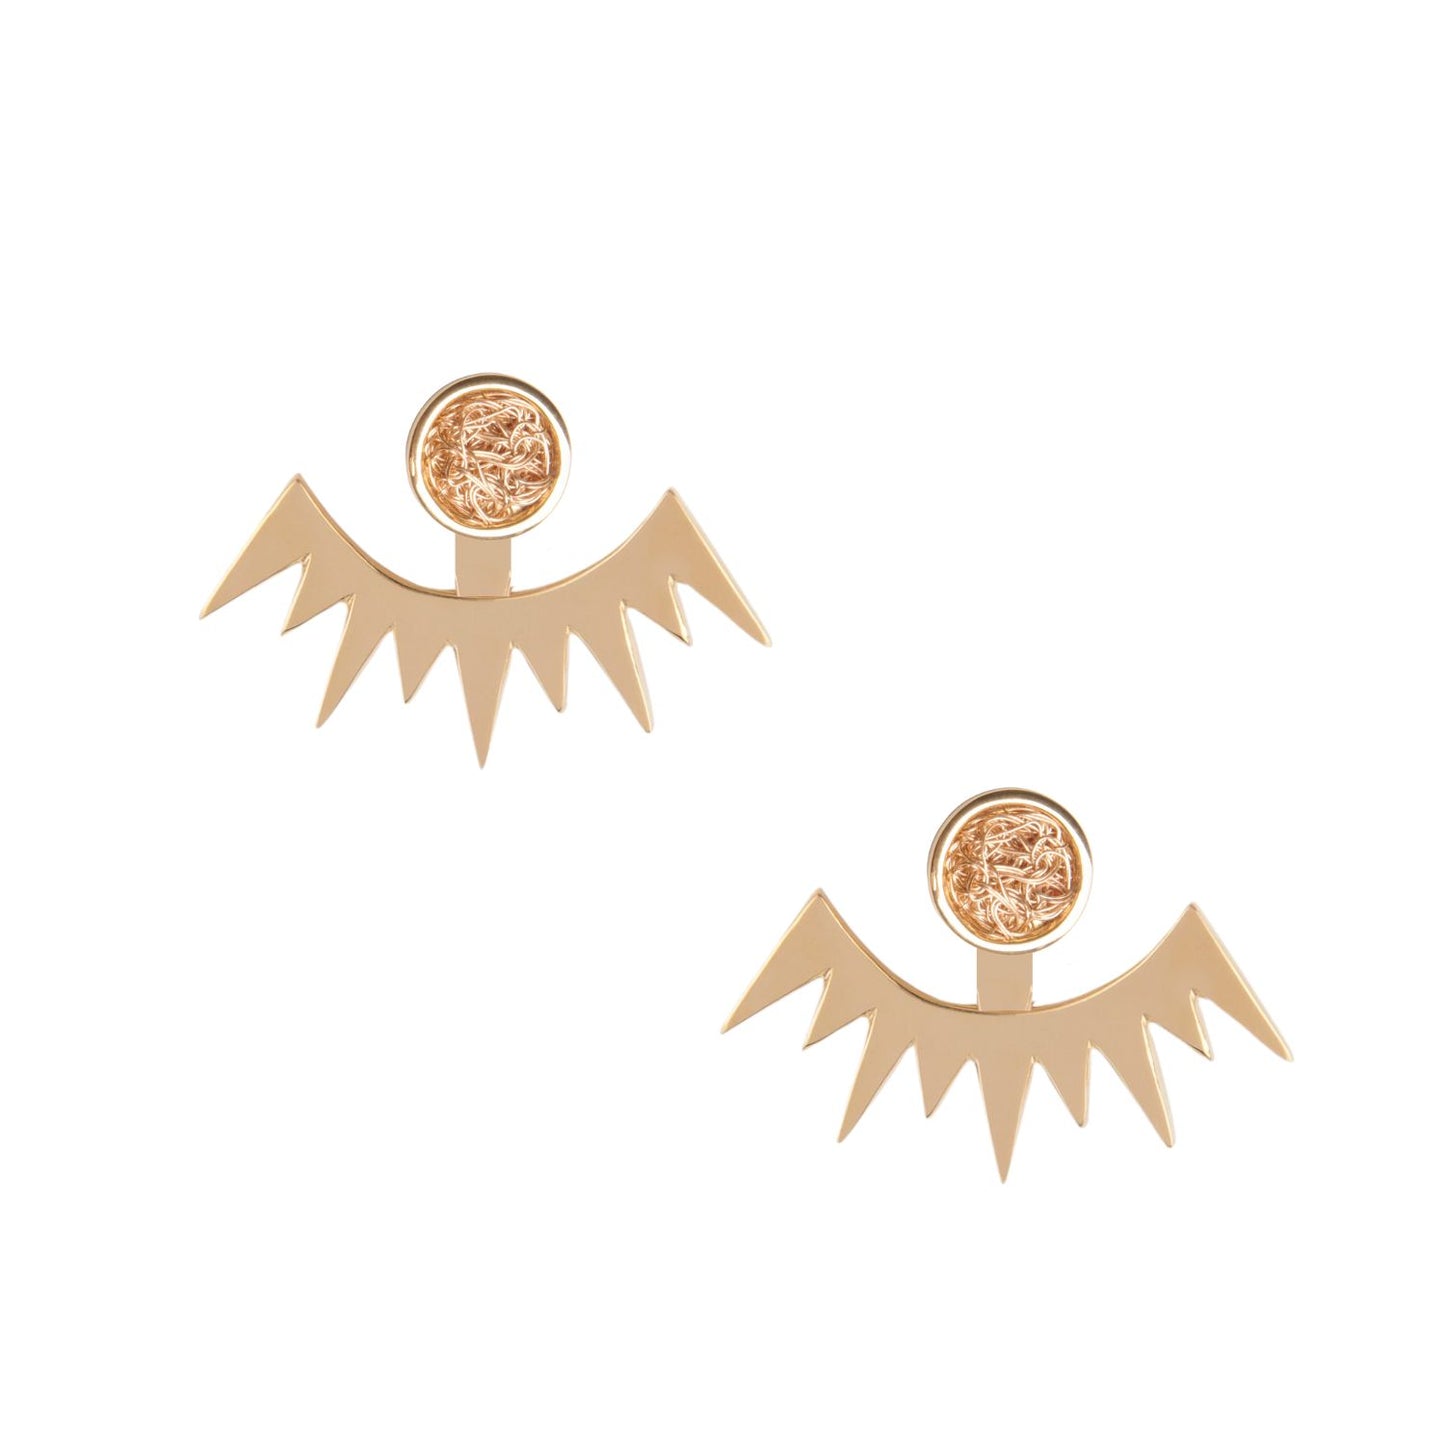 Stylish round stud gold earrings paired with detachable ear jackets for a dynamic and unique fashion ensemble.